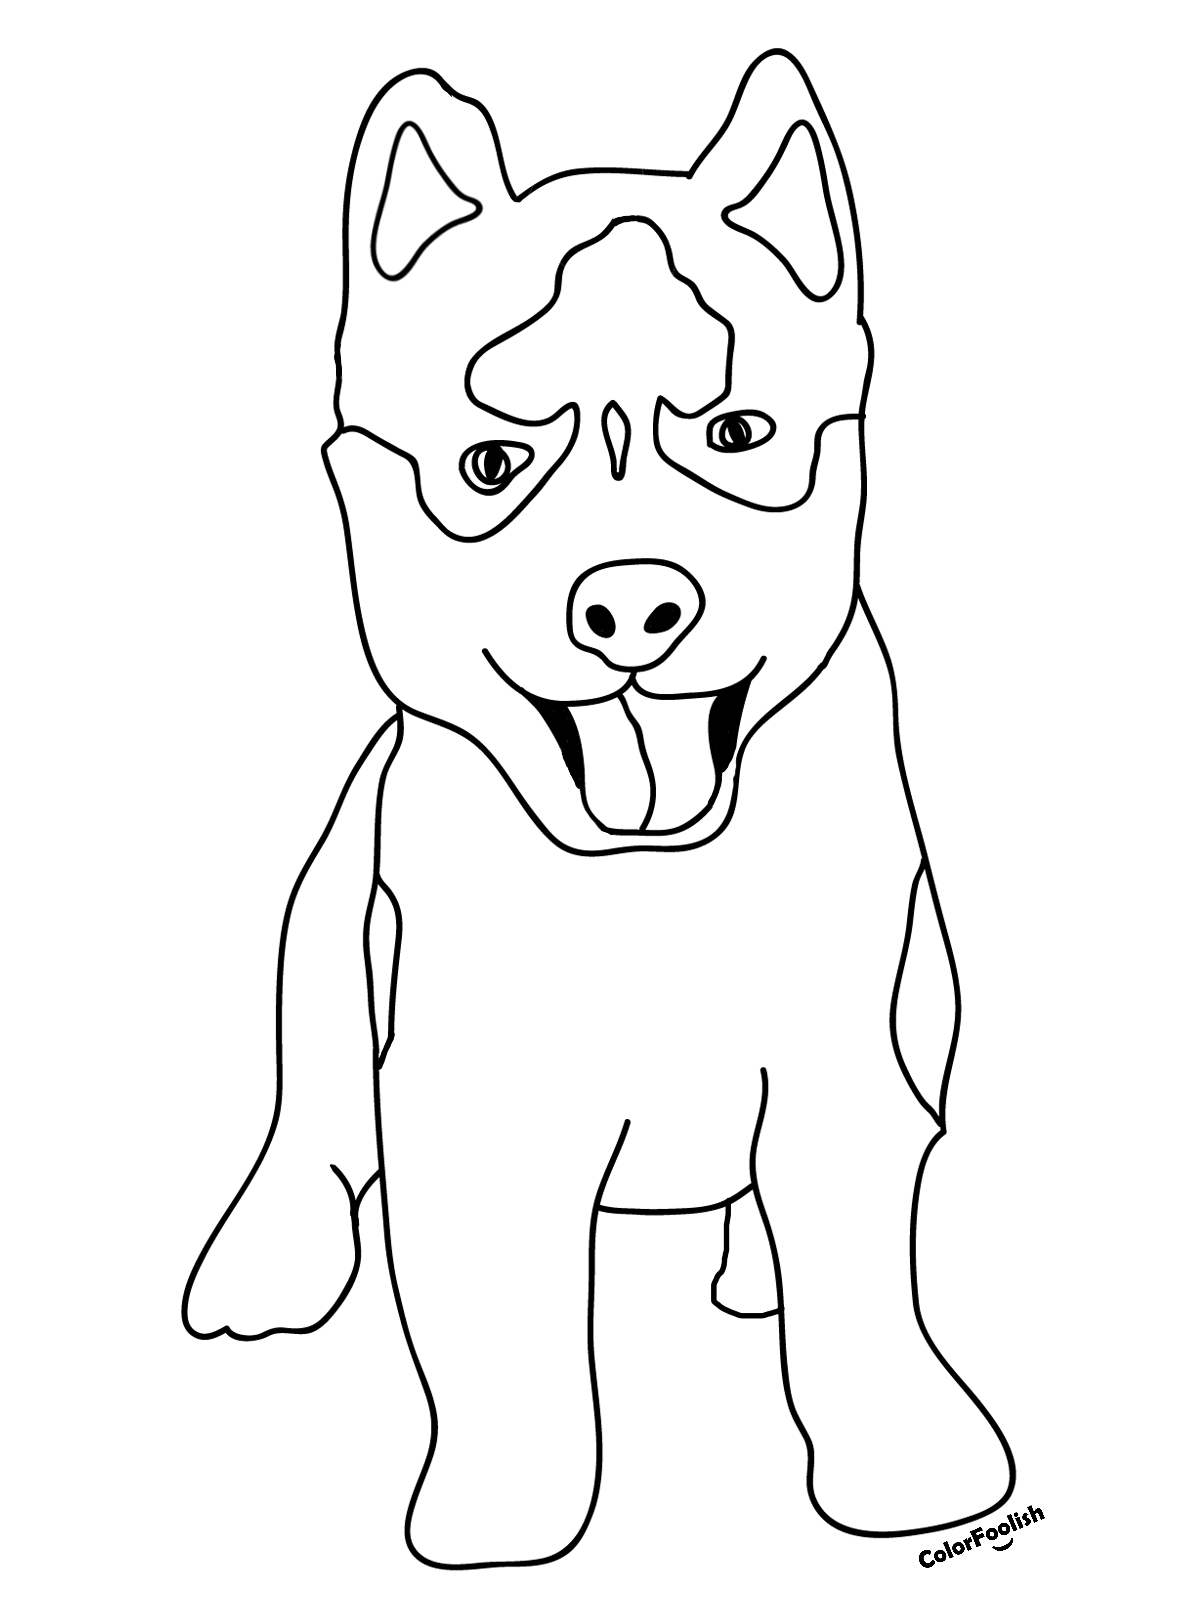 Coloring page of a husky dog puppy